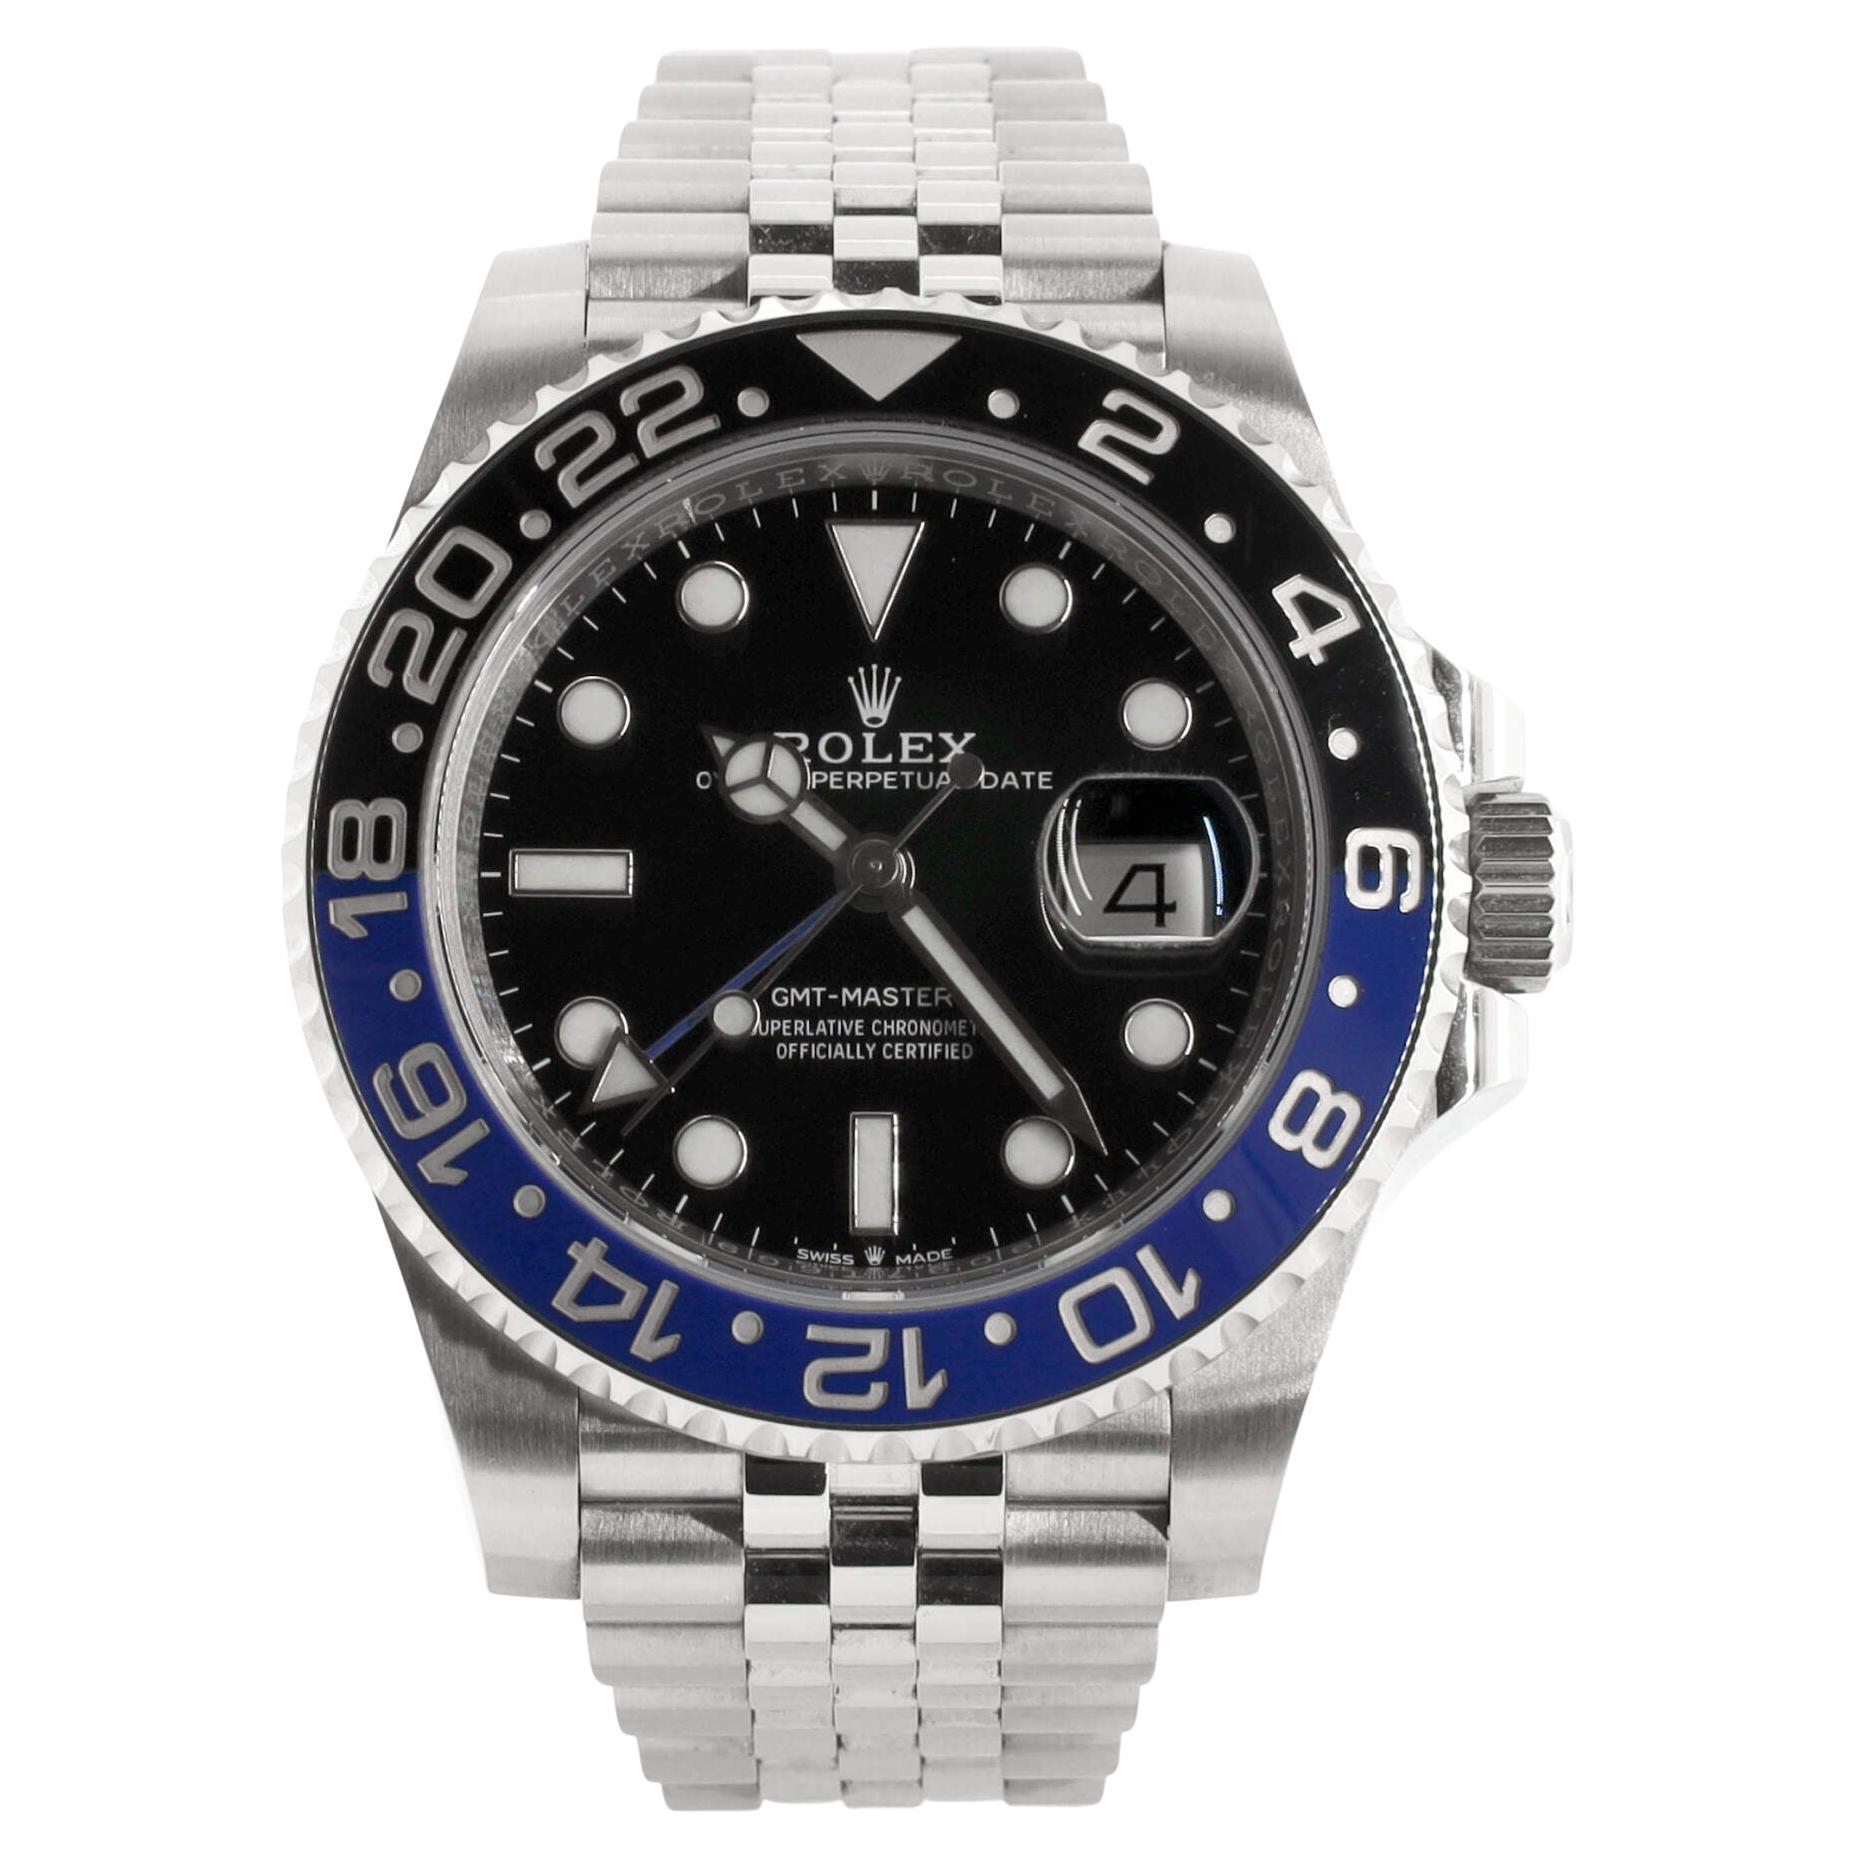 Rolex Oyster Perpetual Date GMT-Master II Batgirl Automatic Watch Stainless